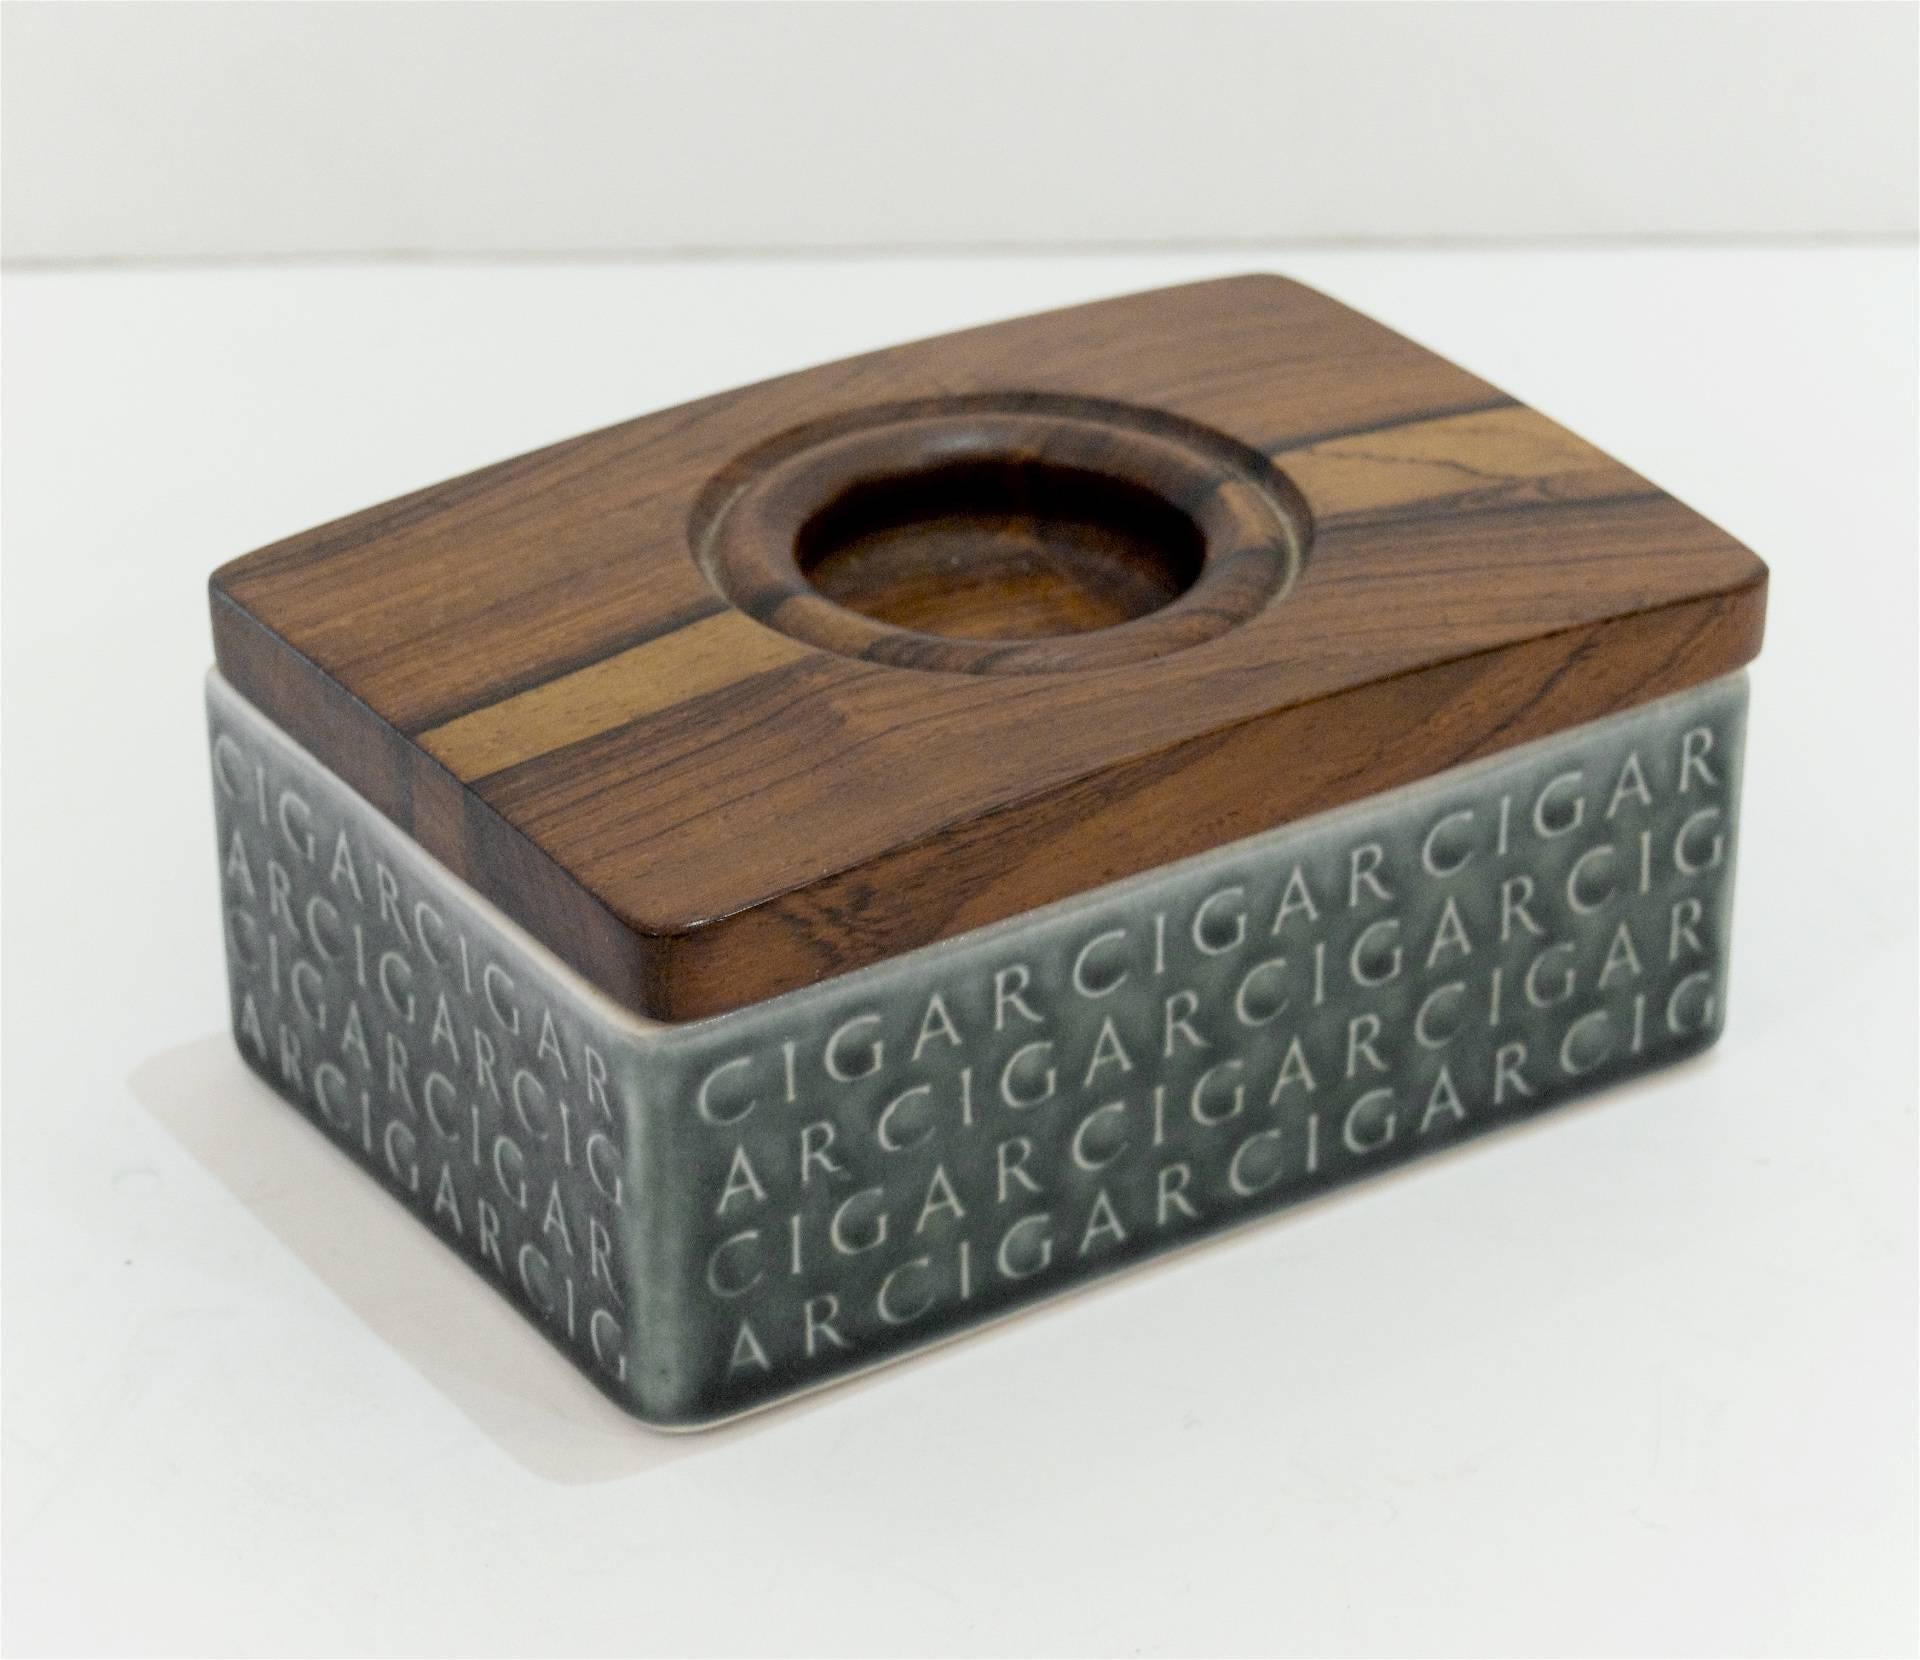 Danish glazed ceramic cigar box by Jens Quistgaard for Kronjyden with carved rosewood top. Signed on underside.